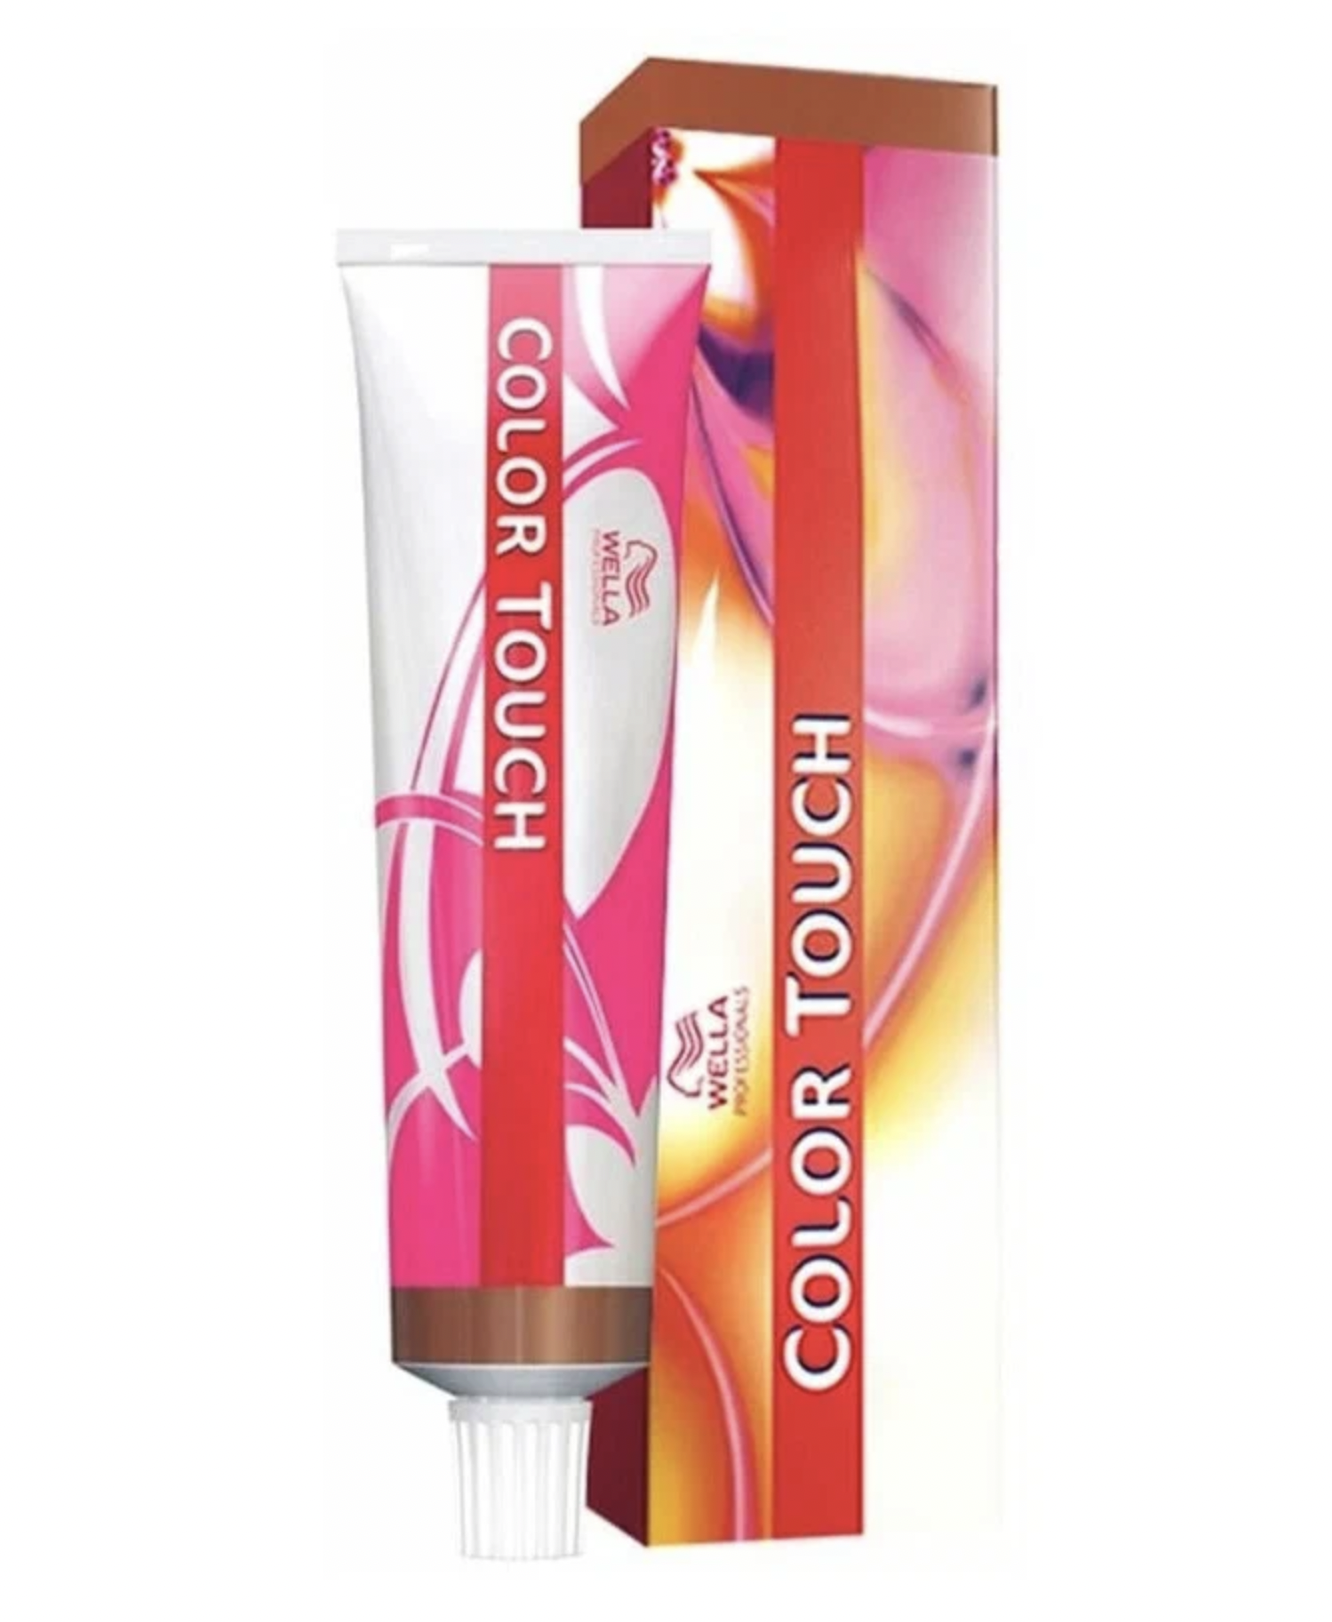   / Wella Color Touch - -    5/75 -  60 